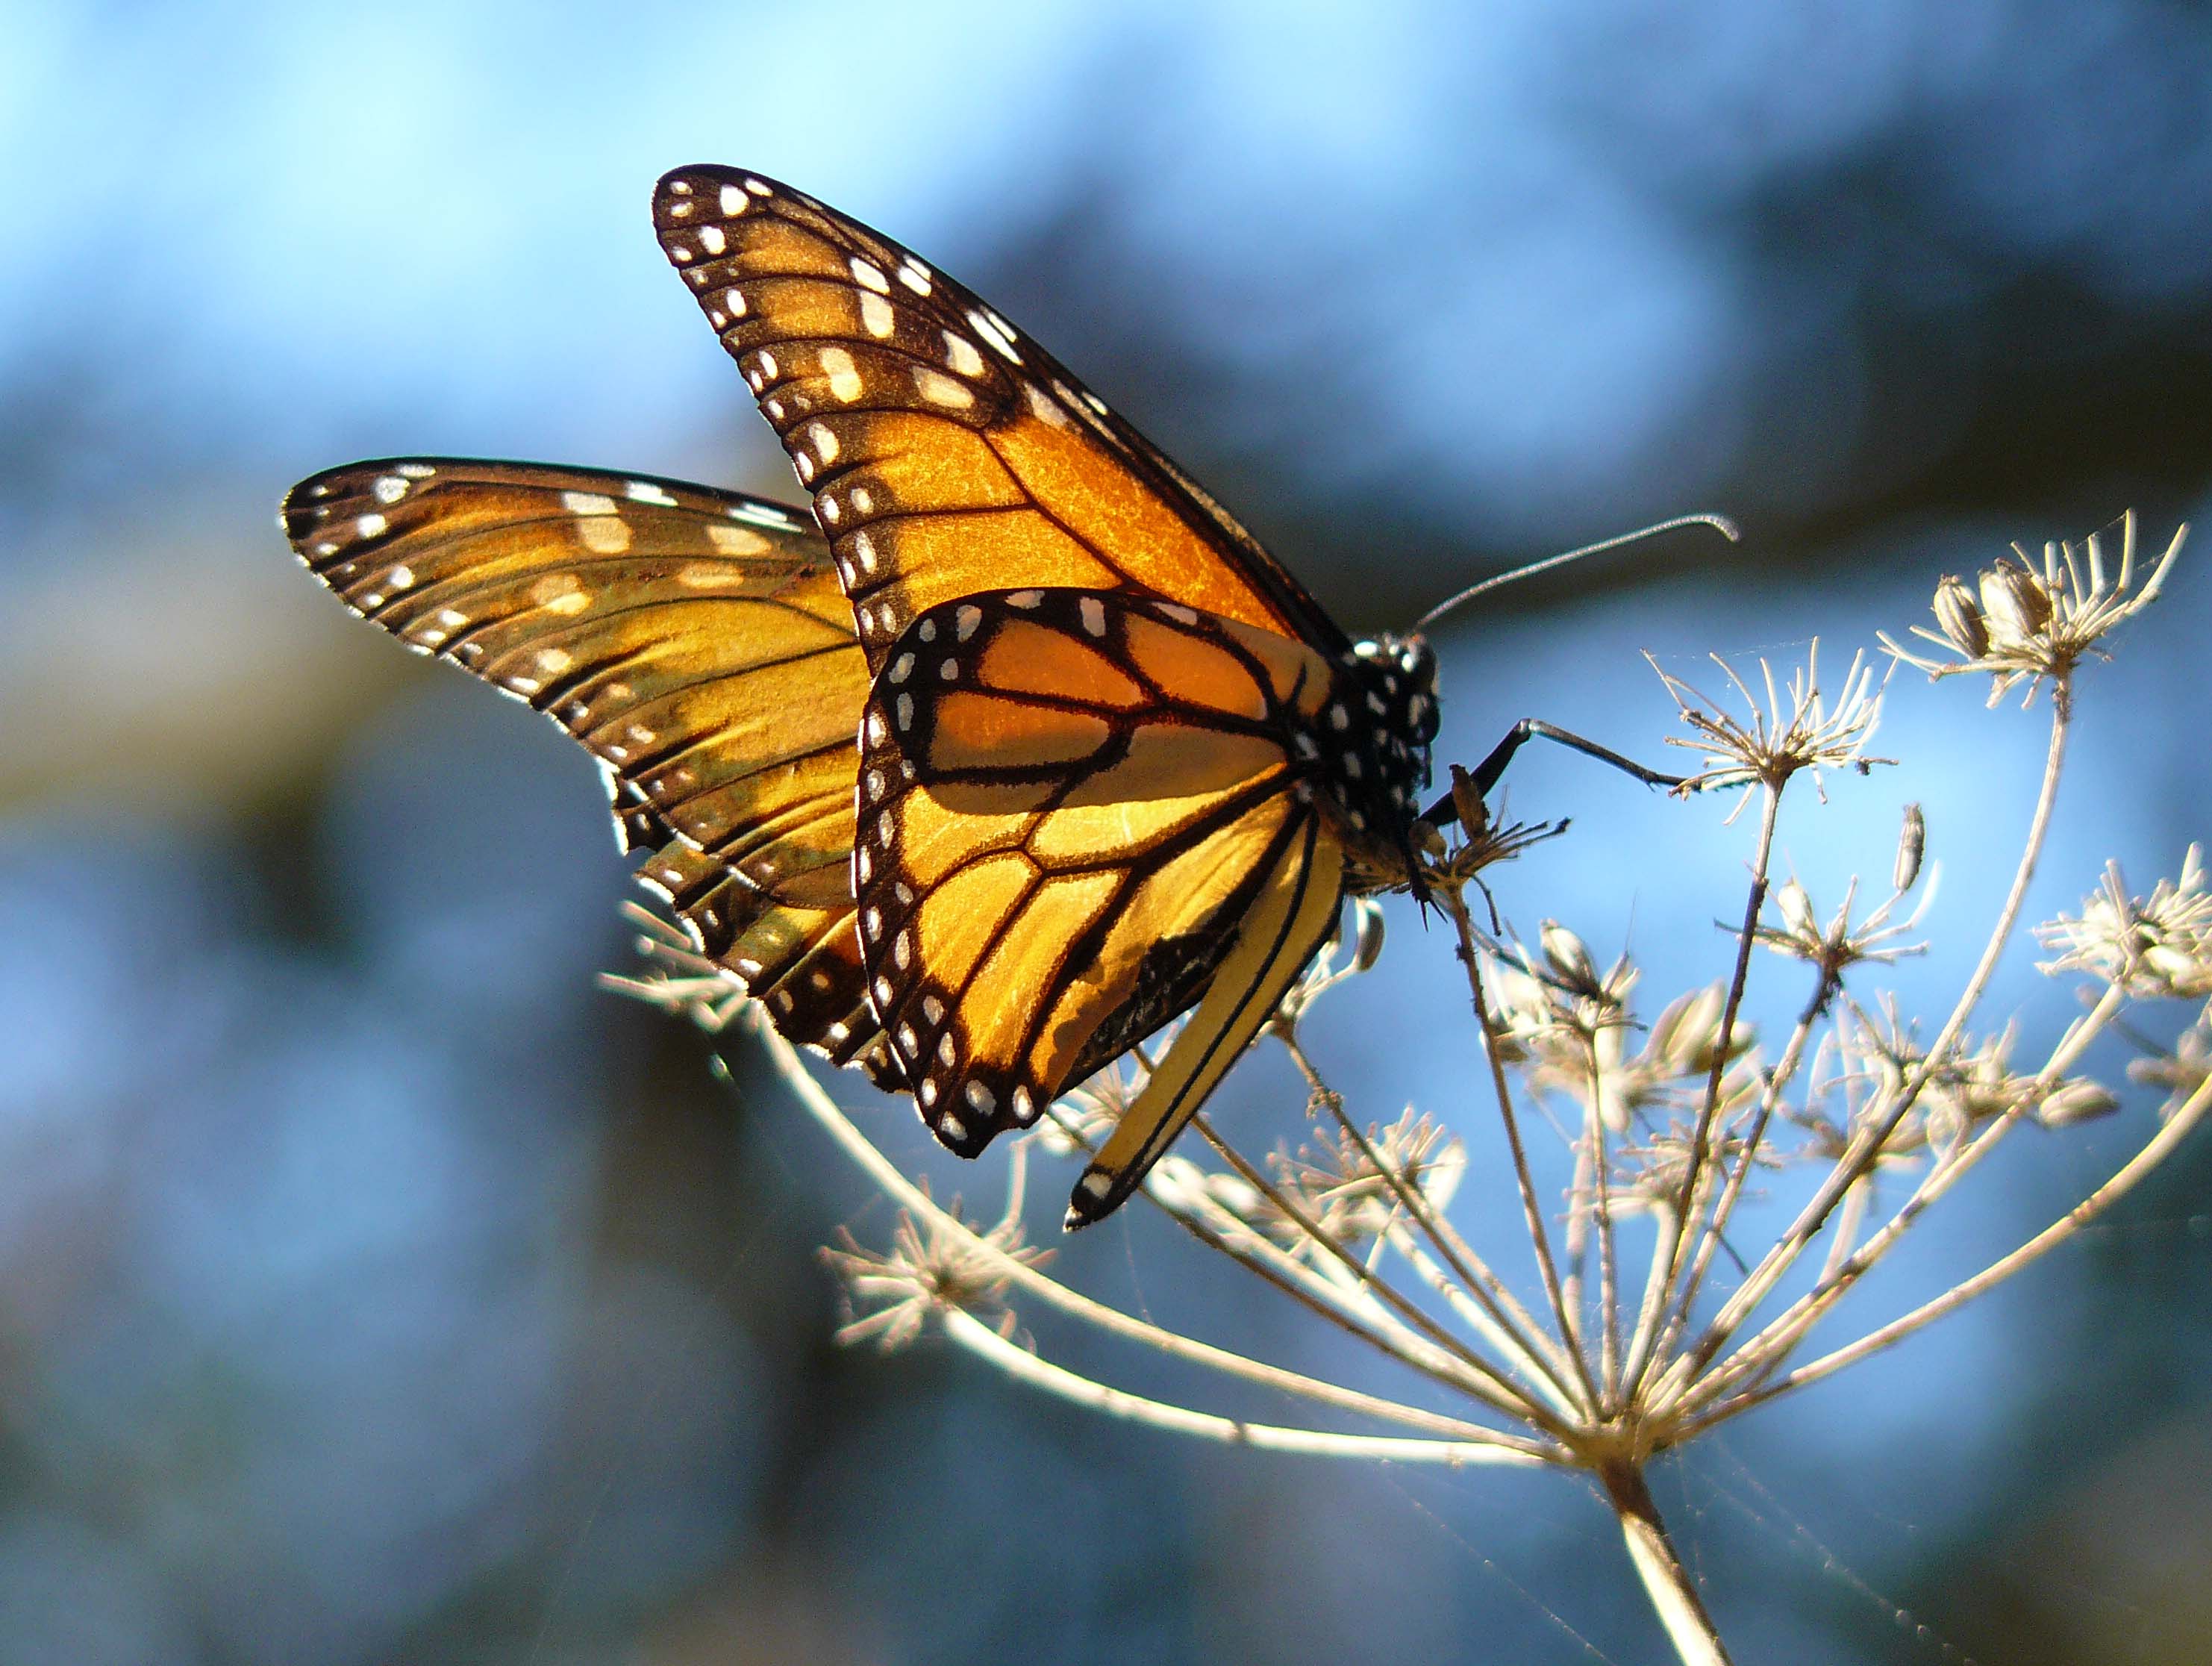 File:Monarch Butterfly resting on fennel, at the Pismo Butterfly ...